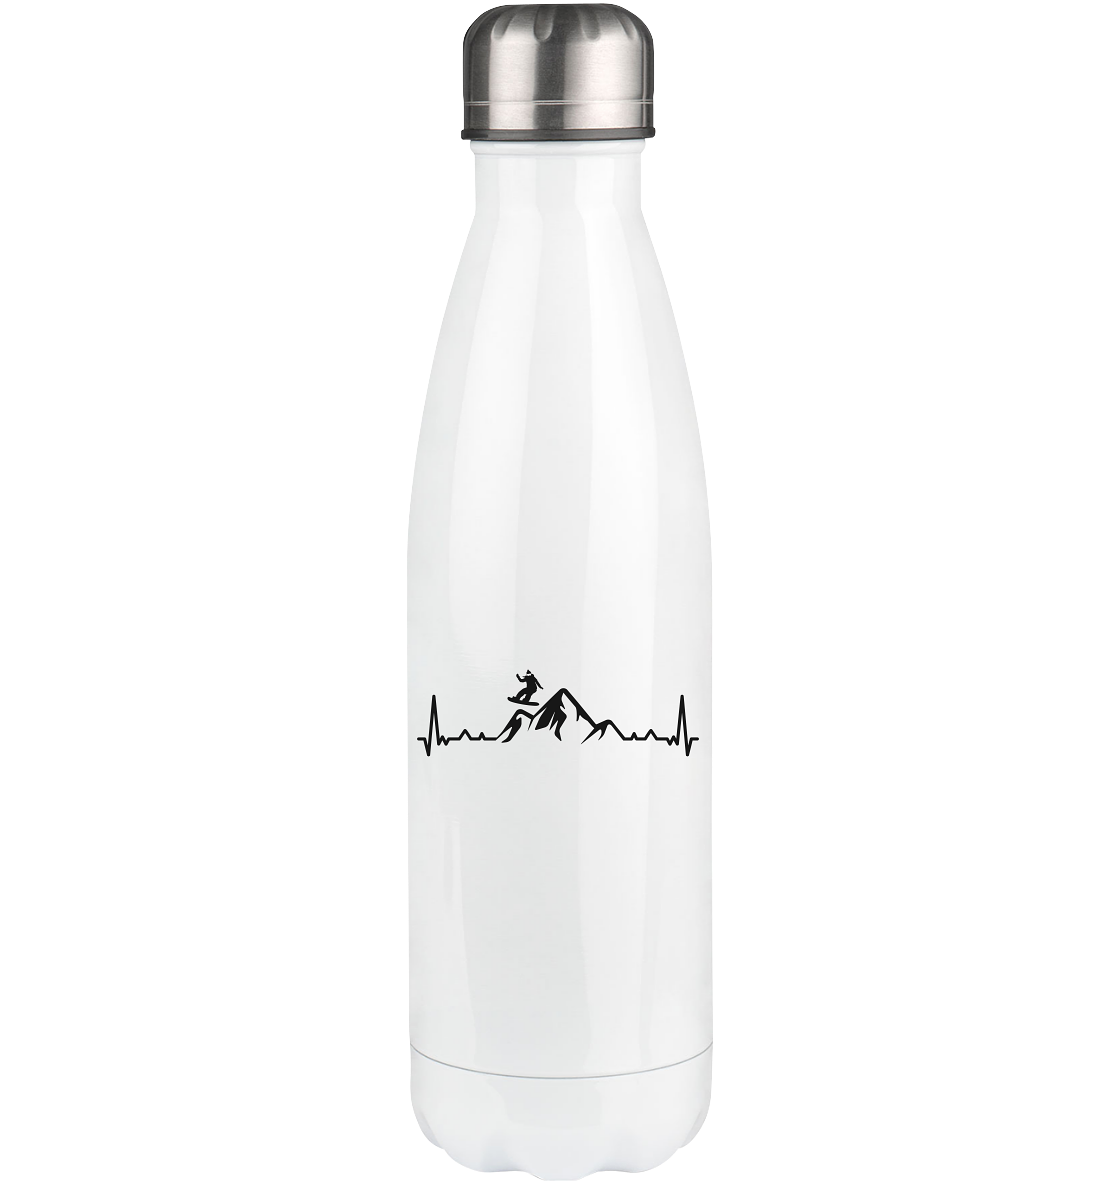 Heartbeat Mountain and Snowboarding - Edelstahl Thermosflasche snowboarden 500ml